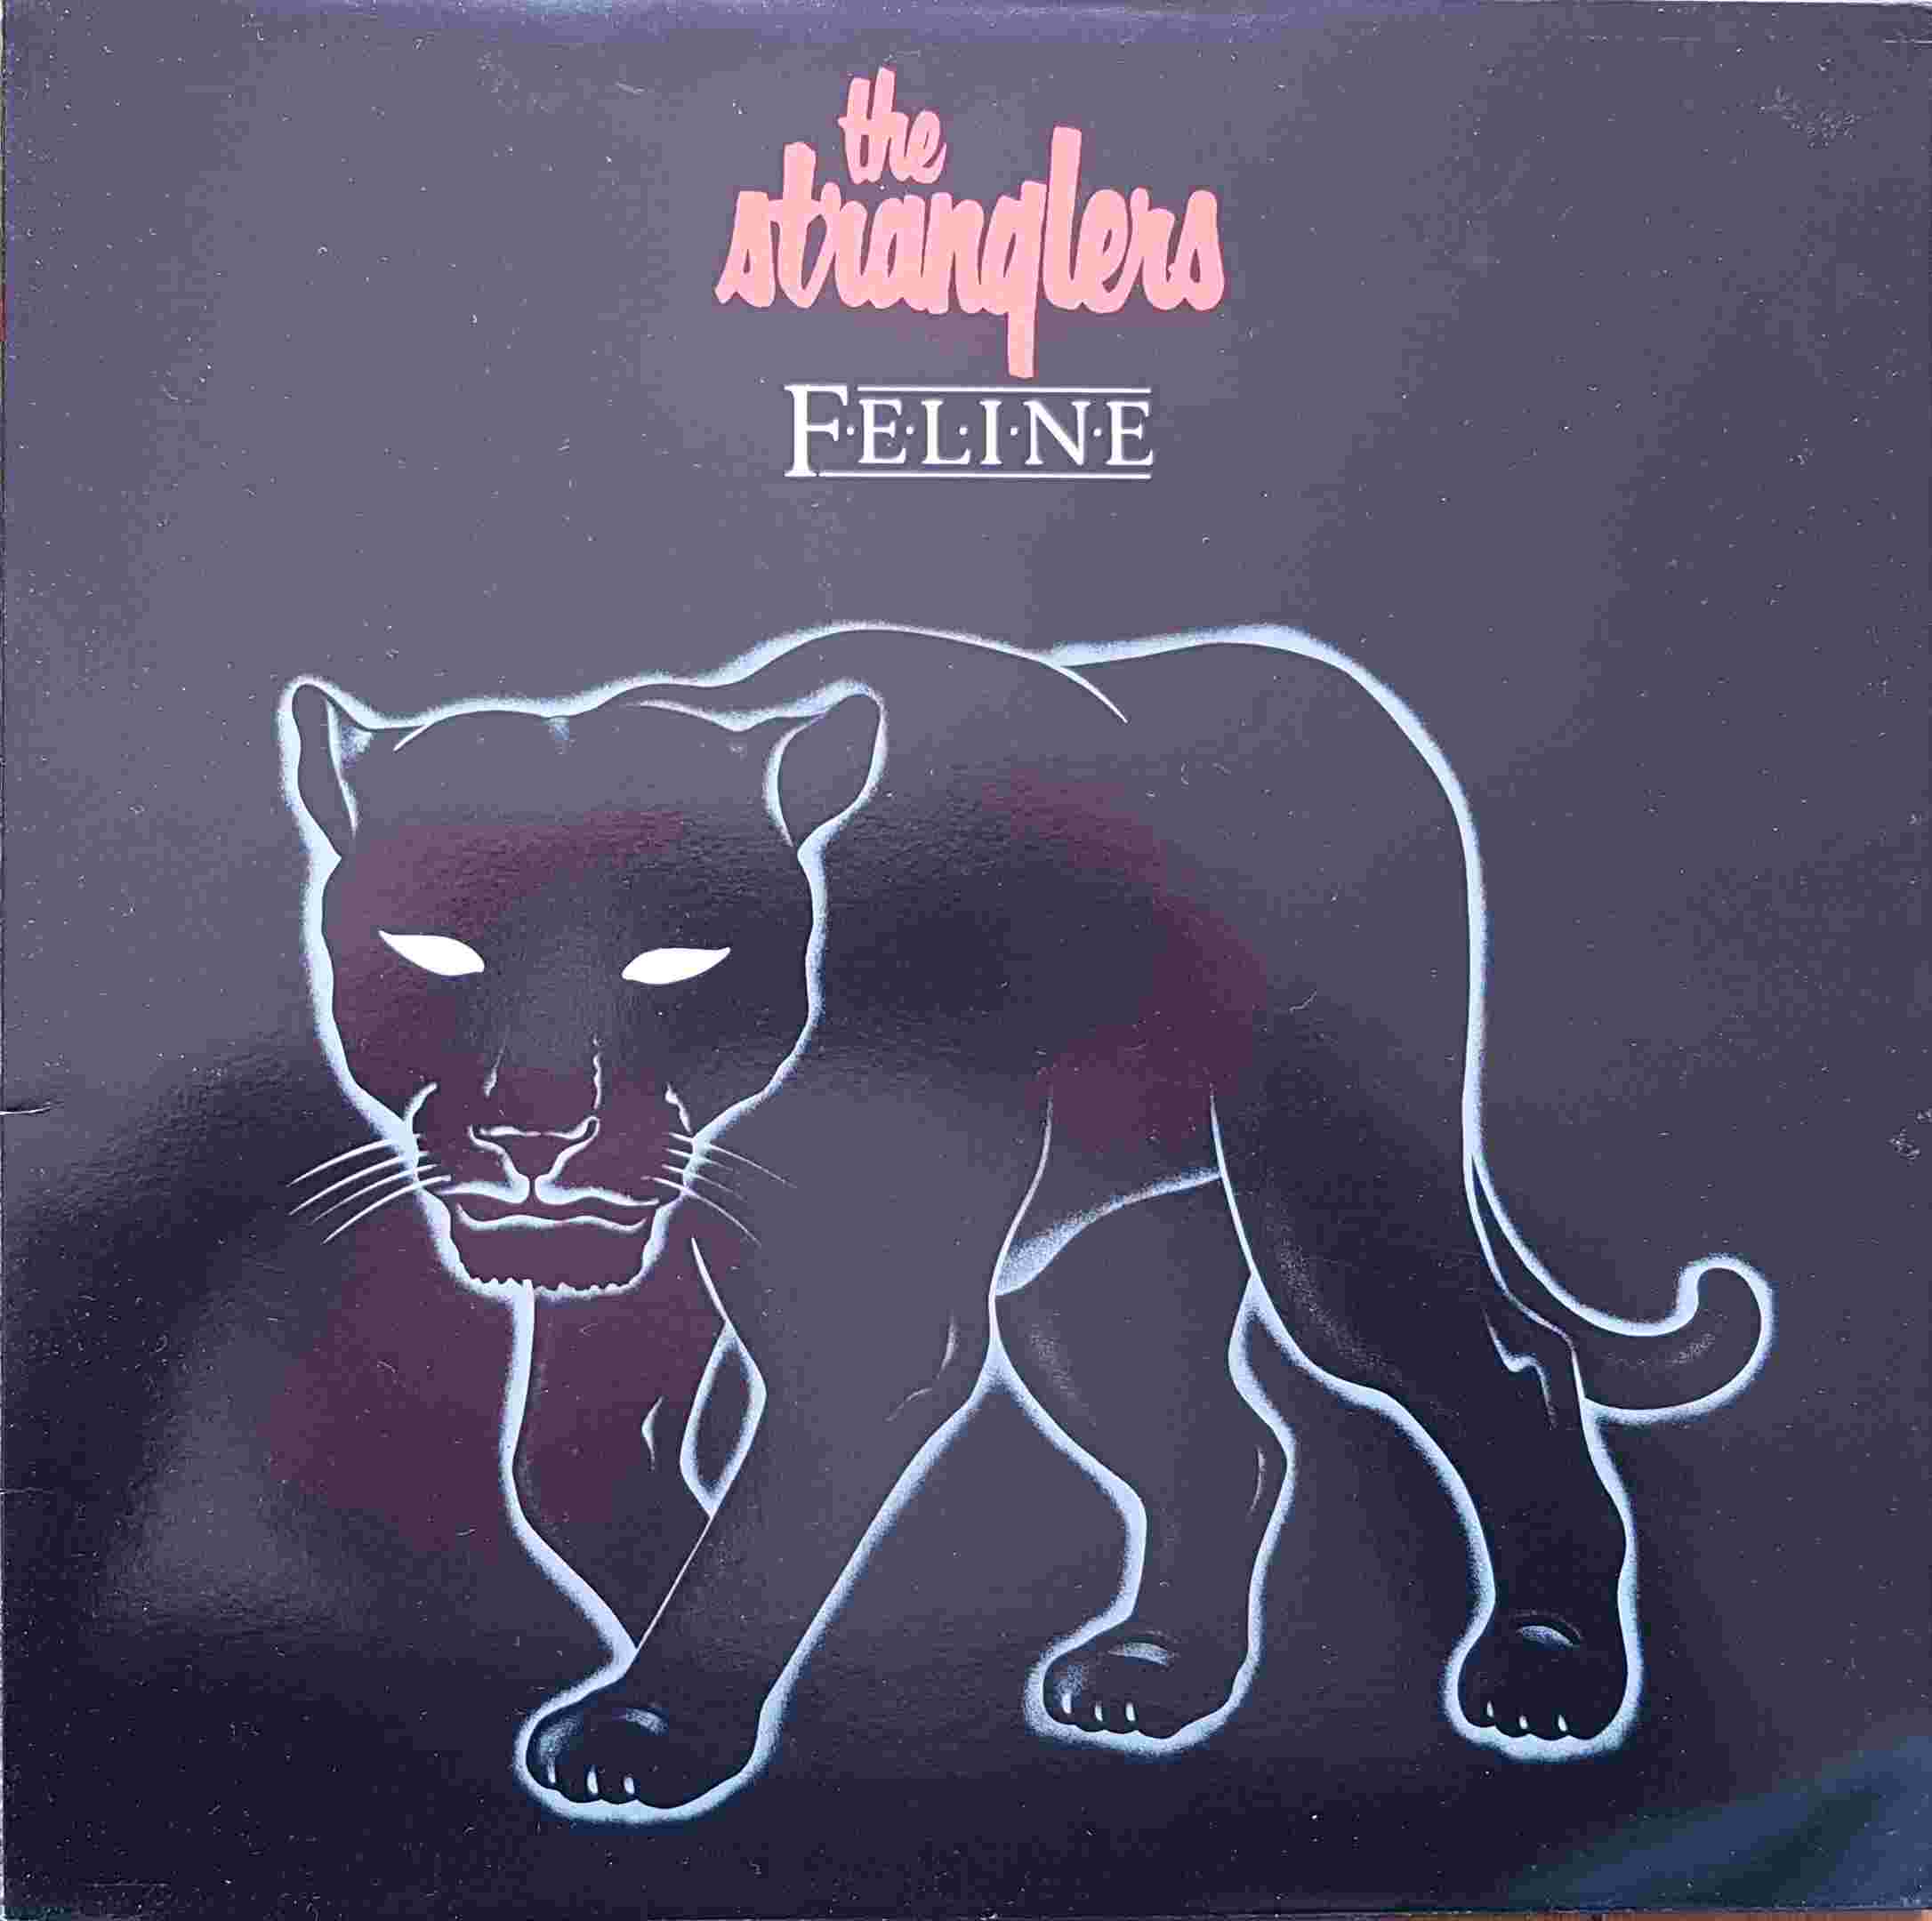 Picture of EPC 25237 Feline by artist The Stranglers 